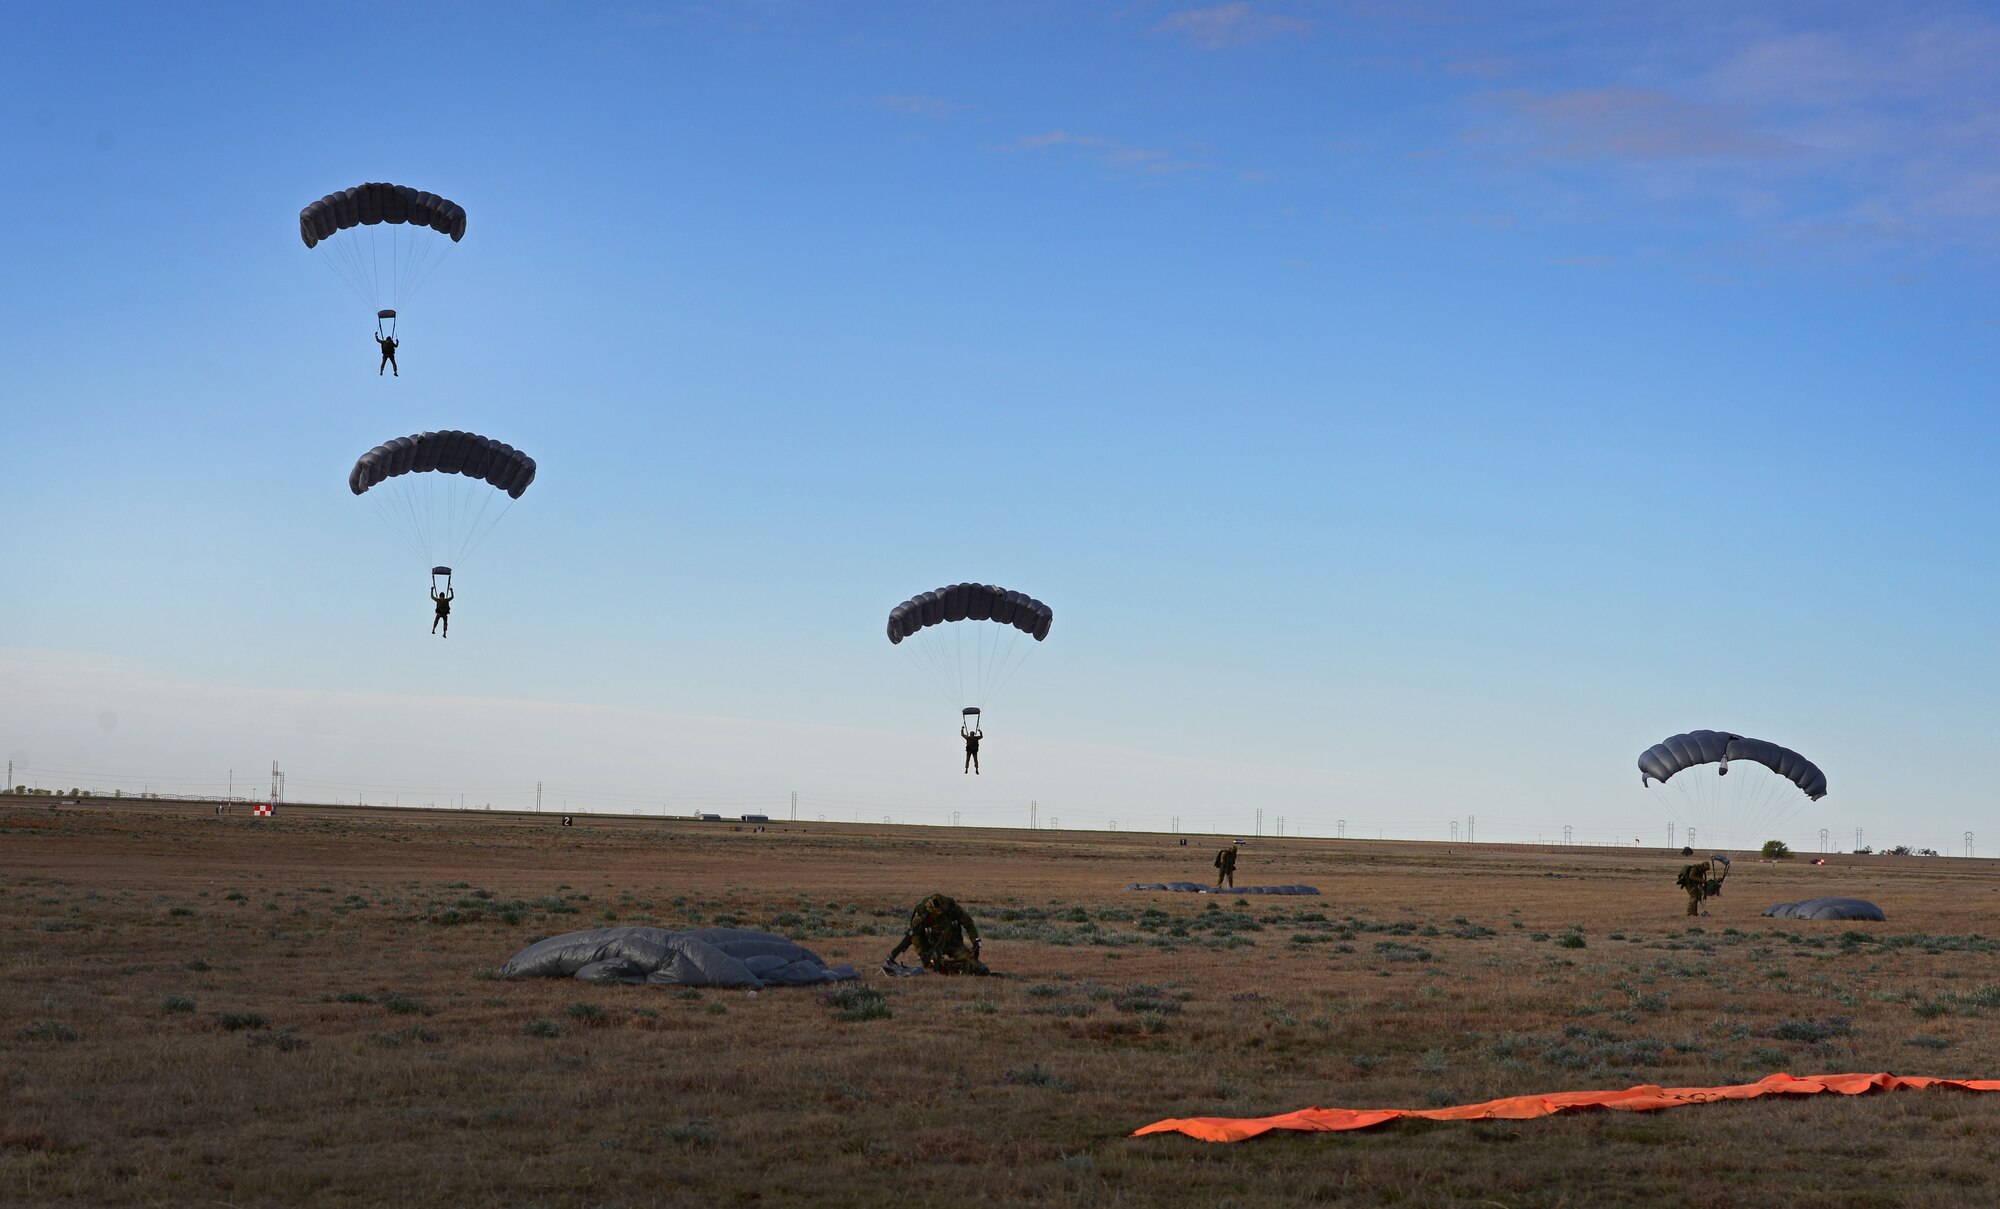 Members with the 26th Special Tactics Squadron make their final decent onto a landing zone March 25, 2016, at Cannon Air Force Base, N.M. Air Commandos with the 26th STS performed routine practice jumps as part of maintaining operational readiness. (U.S. Air Force photo/Staff Sgt. Alexx Pons) 